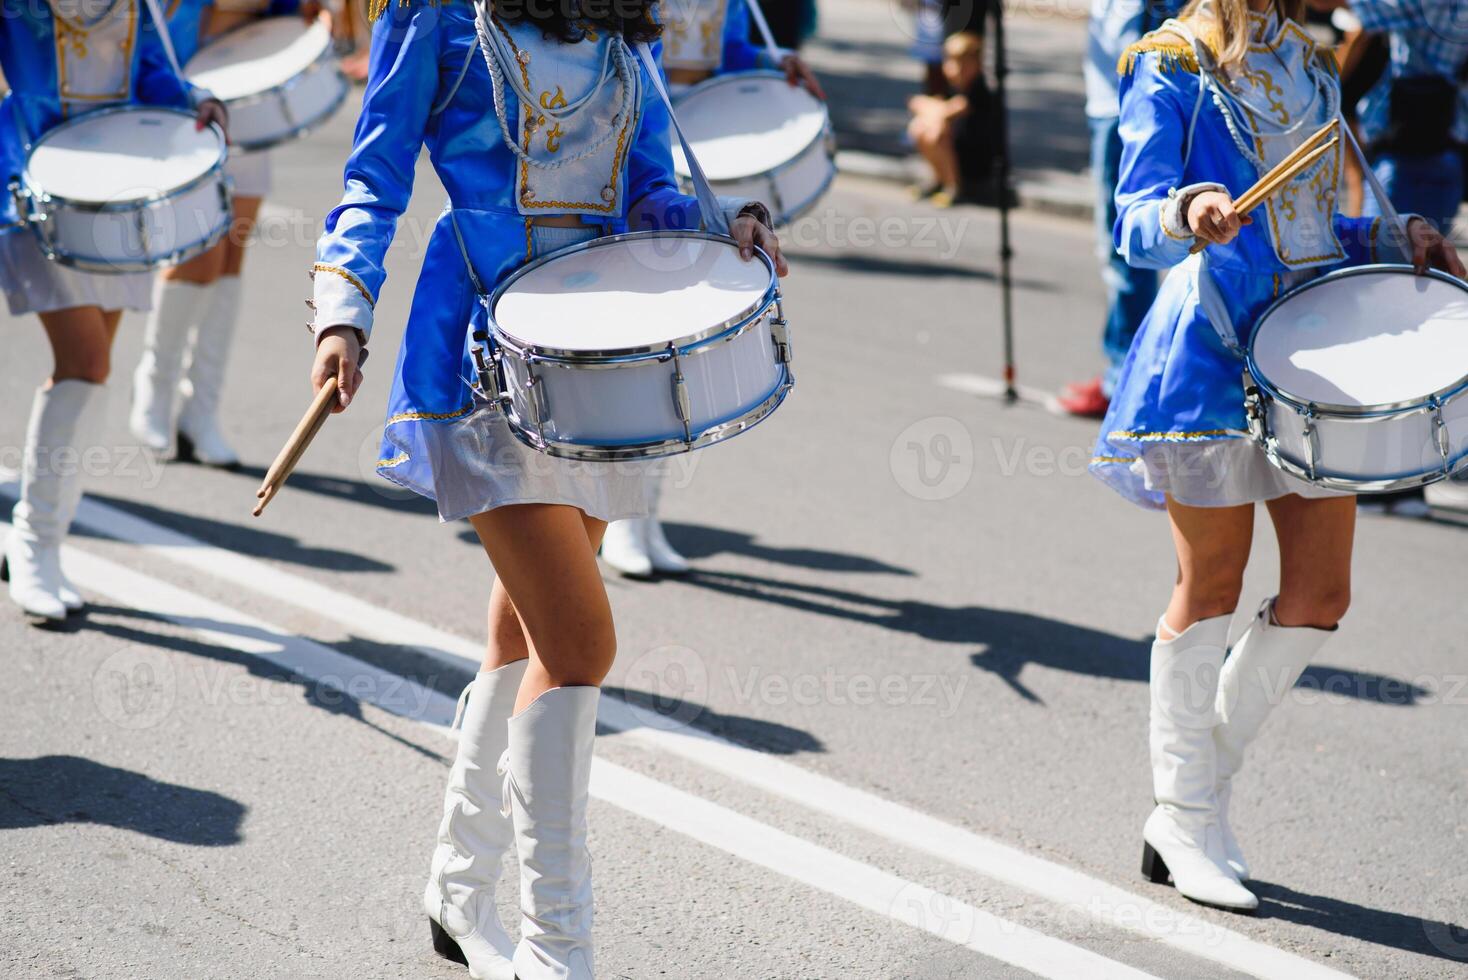 majorettes with white and blue uniforms perform in the streets of the city. photographic series photo